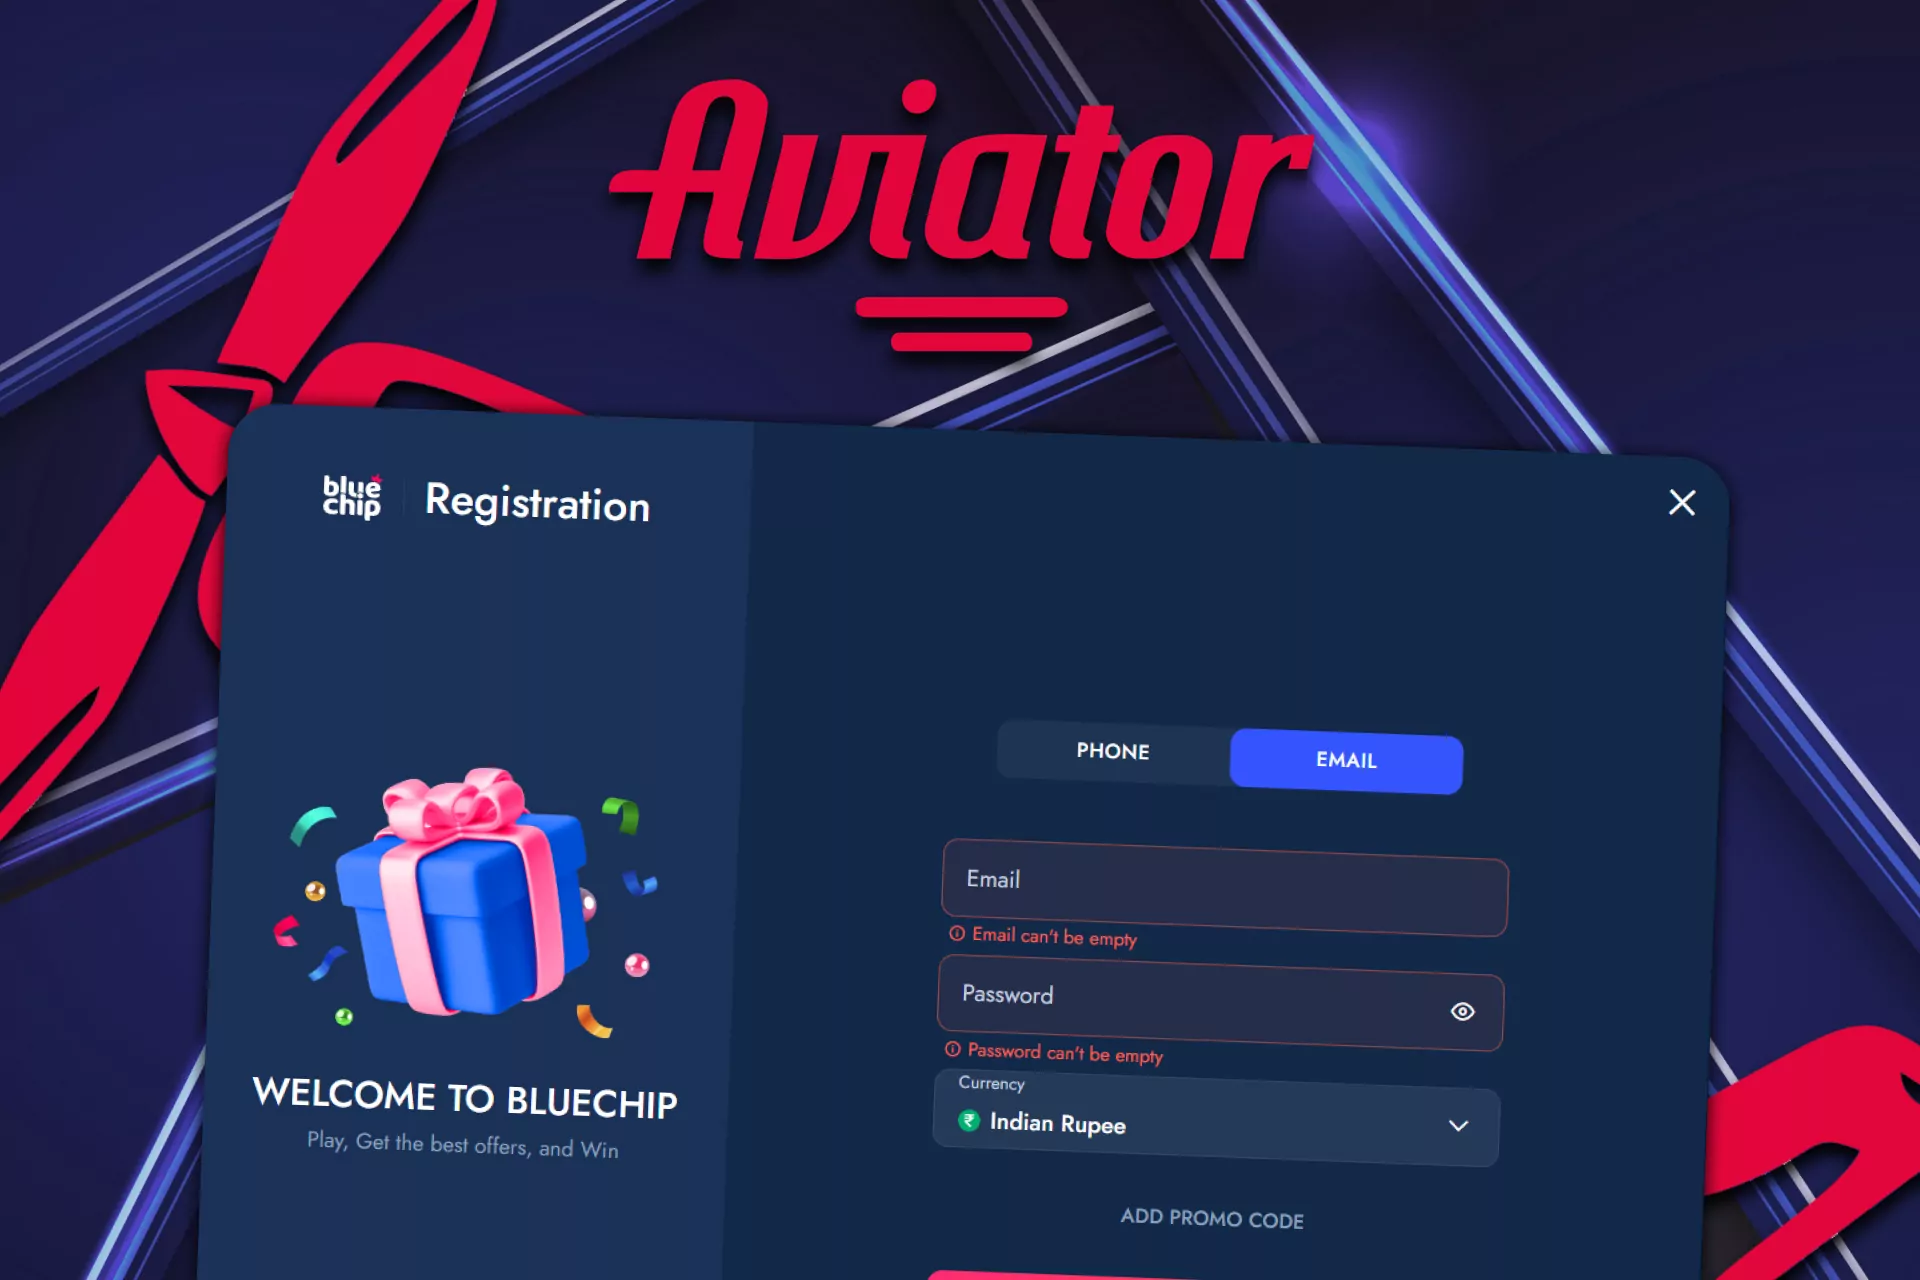 Create an account on Bluechip to start playing Aviator.